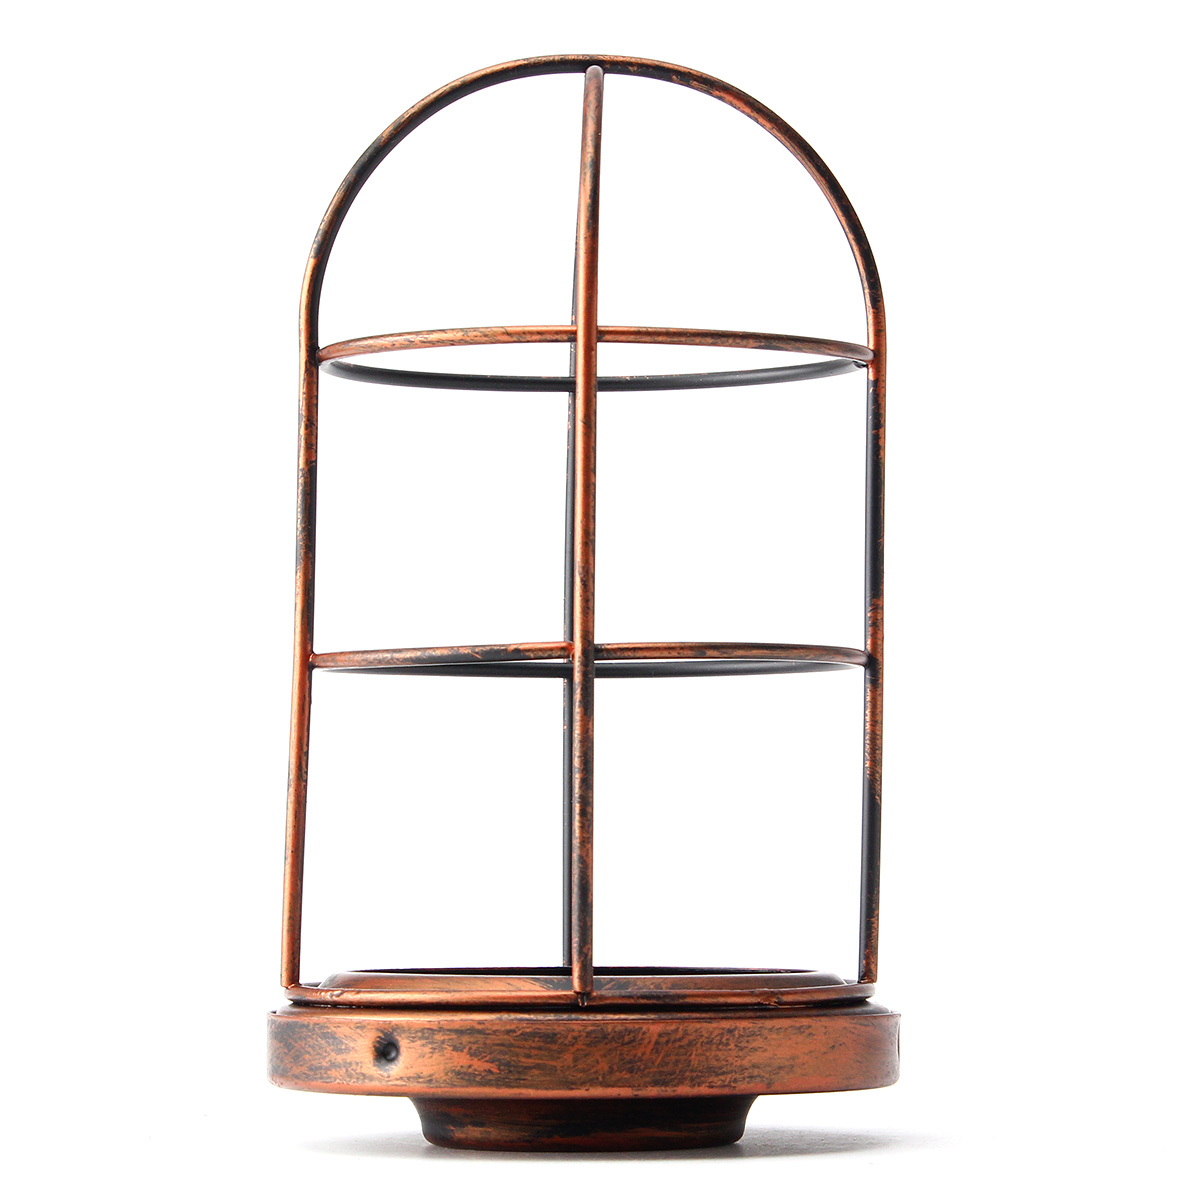 Iron-Vintage-Ceiling-Pendant-Light-Lamp-Cover-Long-Shape-Cage-Bar-Cafe-Lampshade-1079657-7